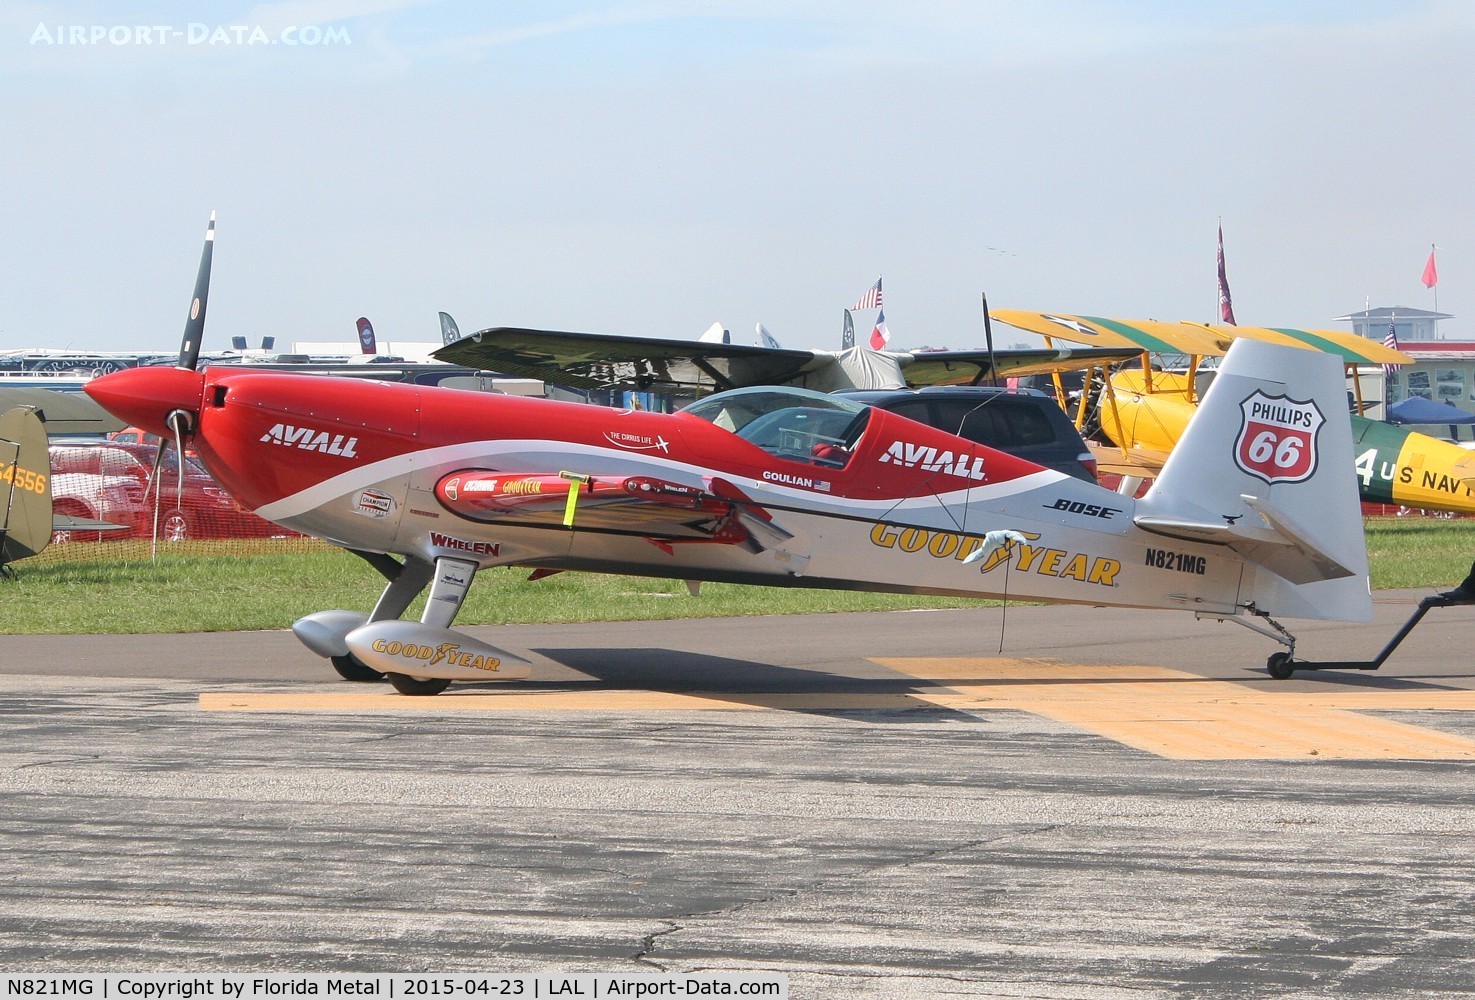 N821MG, 2009 Extra EA-300SC C/N SC010, Extra 300 used by Michael Goulian